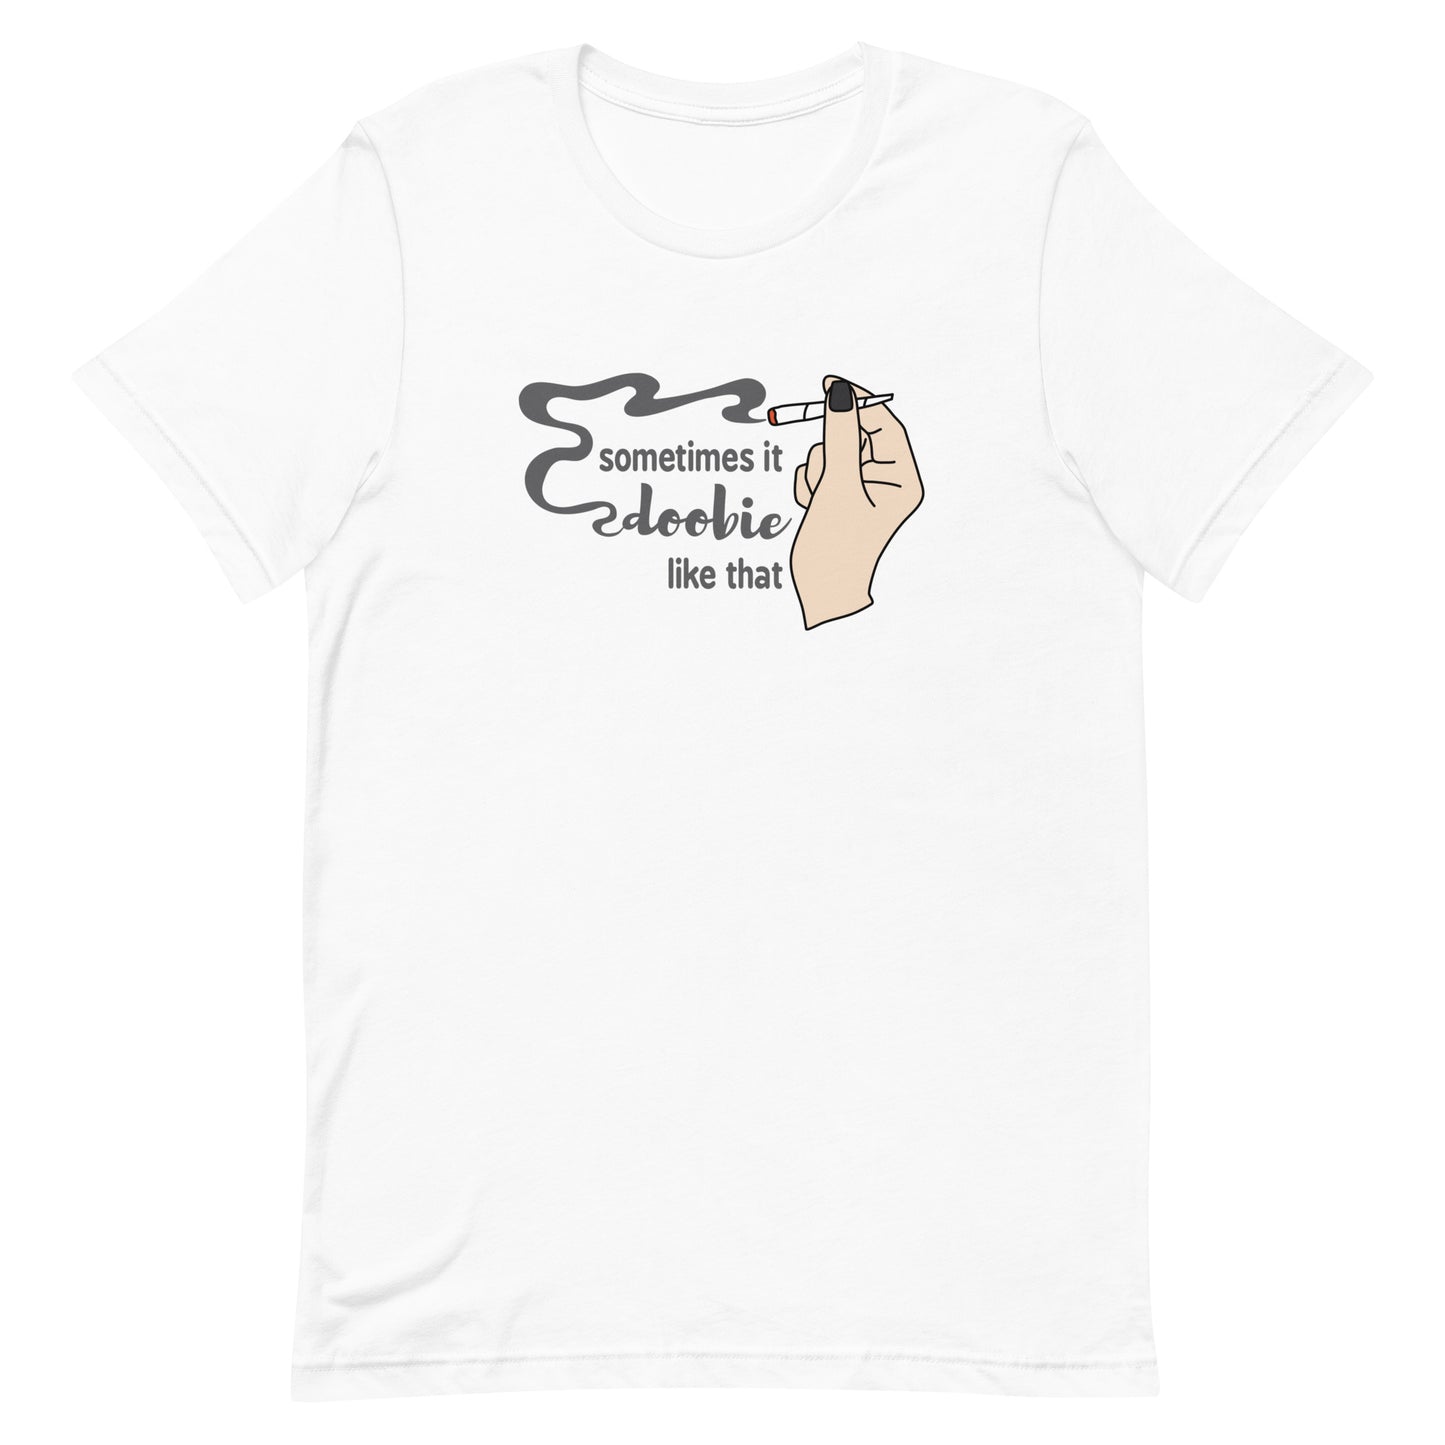 A white crewneck t-shirt featuring an illustration of a hand holding a smoking joint. Text alongside the hand reads "Sometimes it doobie like that" with the word "doobie" made of smoke from the joint.